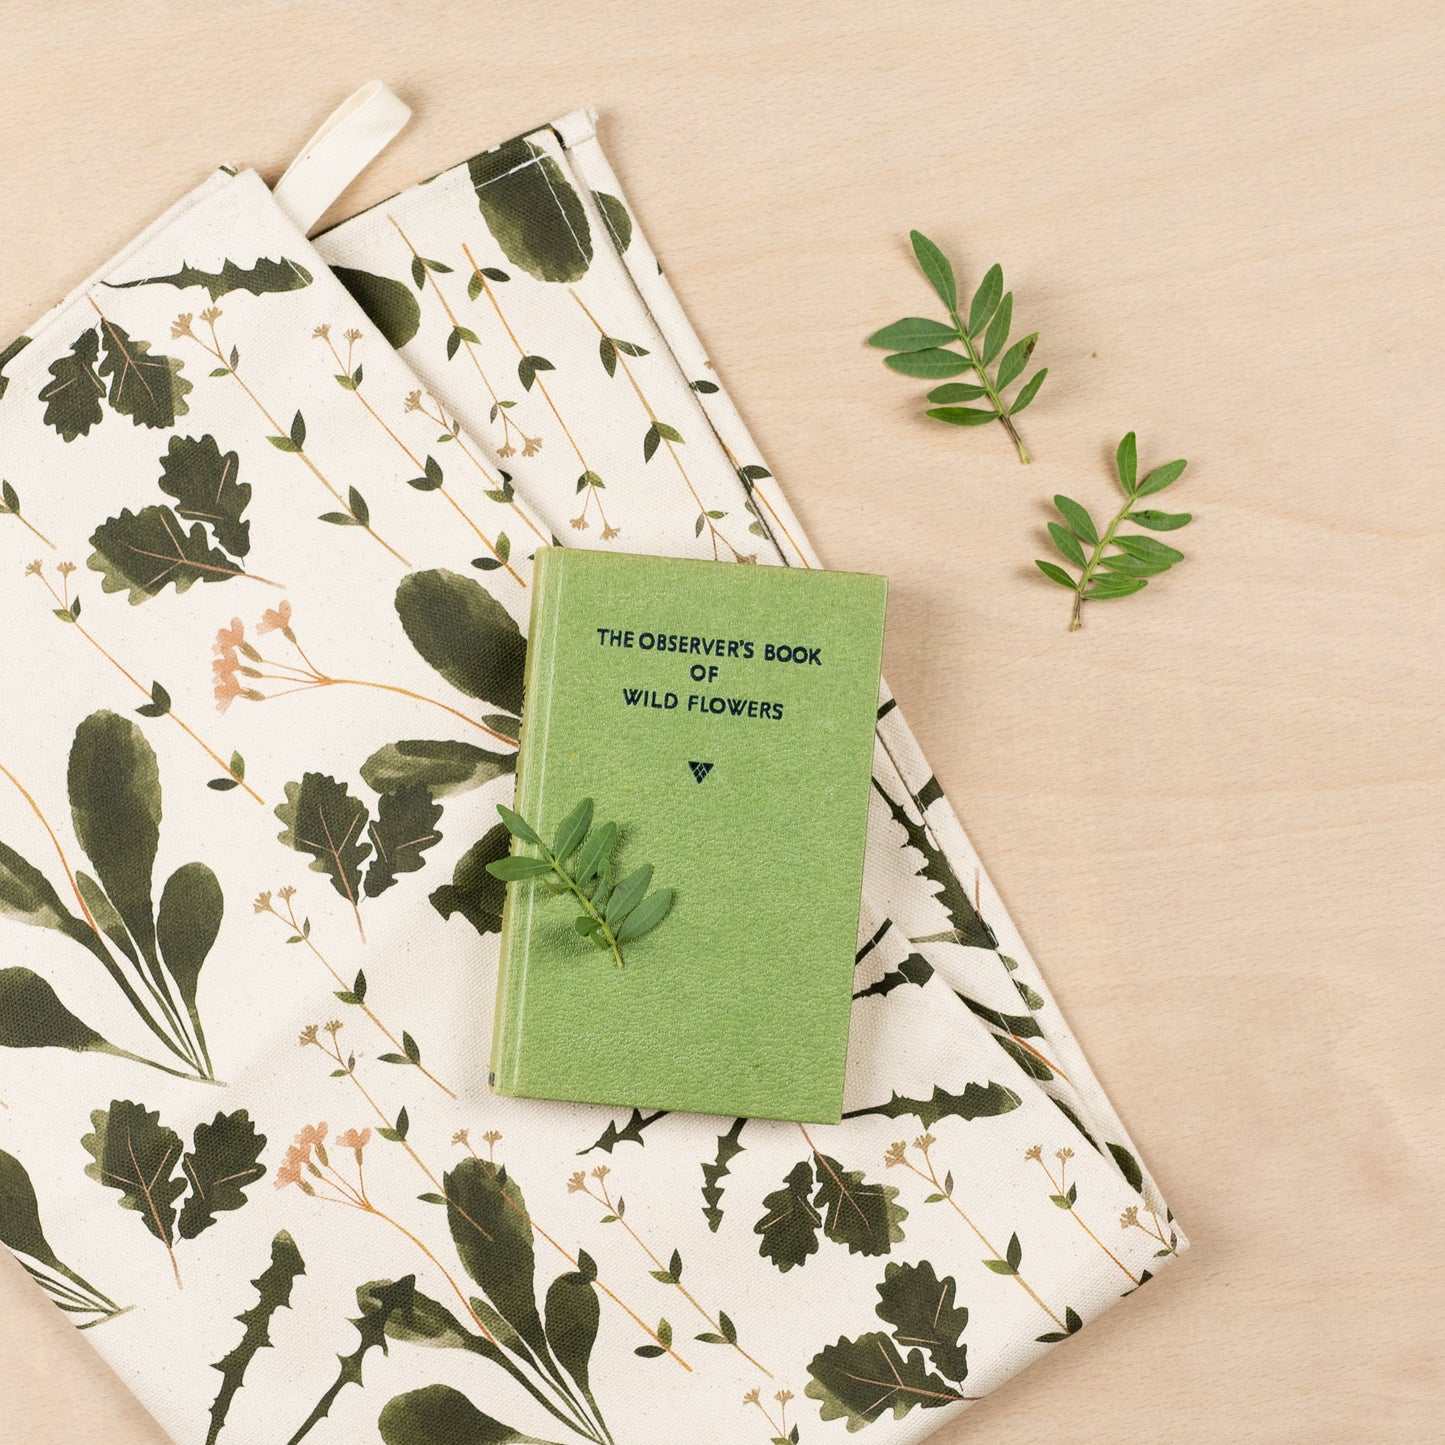 A folded tea towel on a wooden surface with a green book of wildflowers on top of the tea towel.